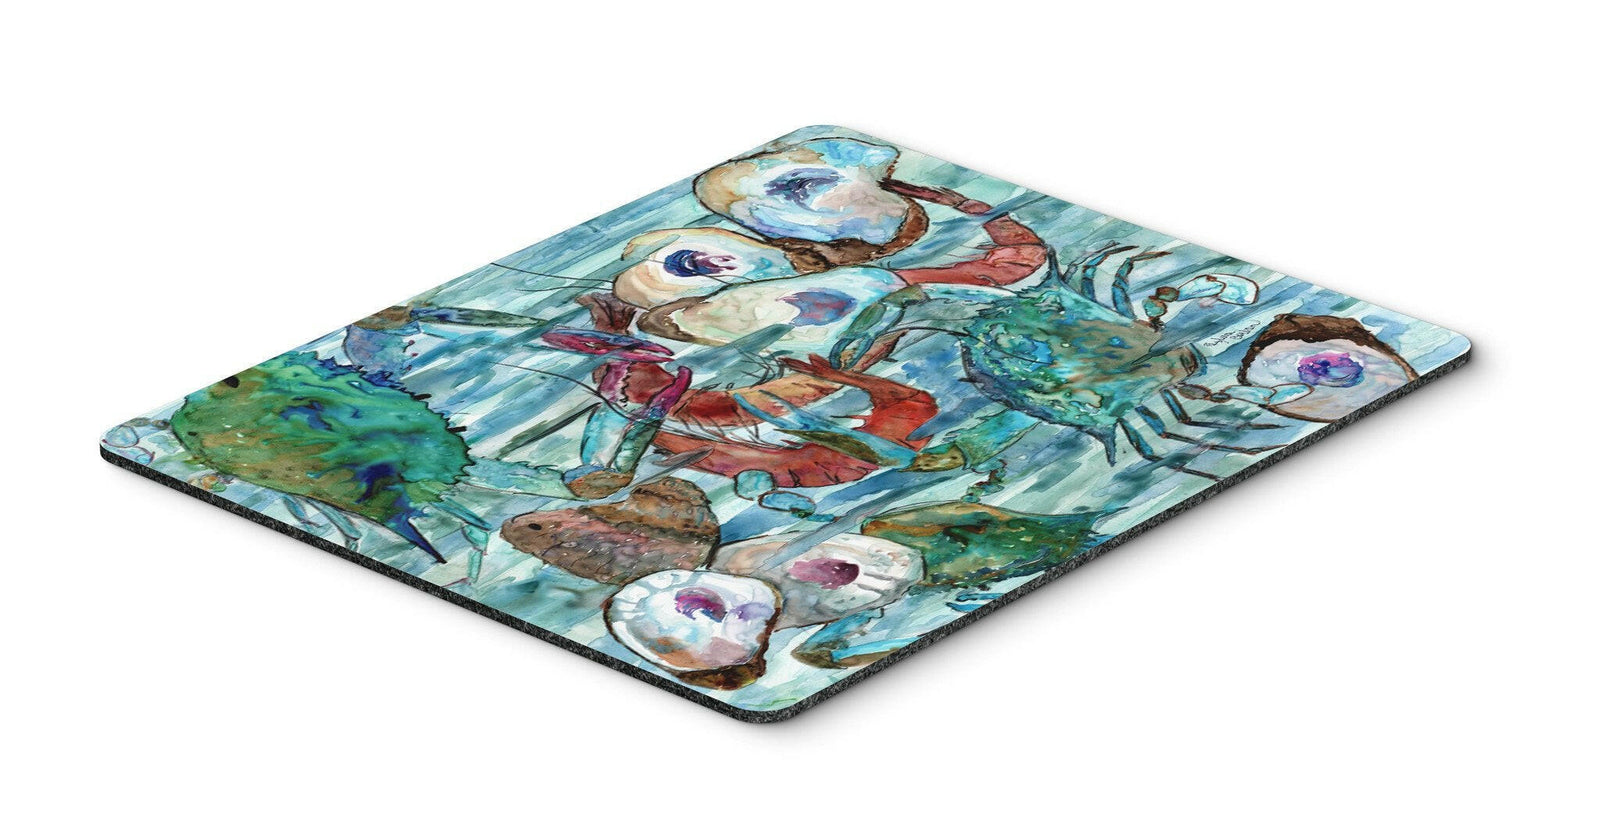 Watery Shrimp, Crabs and Oysters Mouse Pad, Hot Pad or Trivet 8964MP by Caroline's Treasures